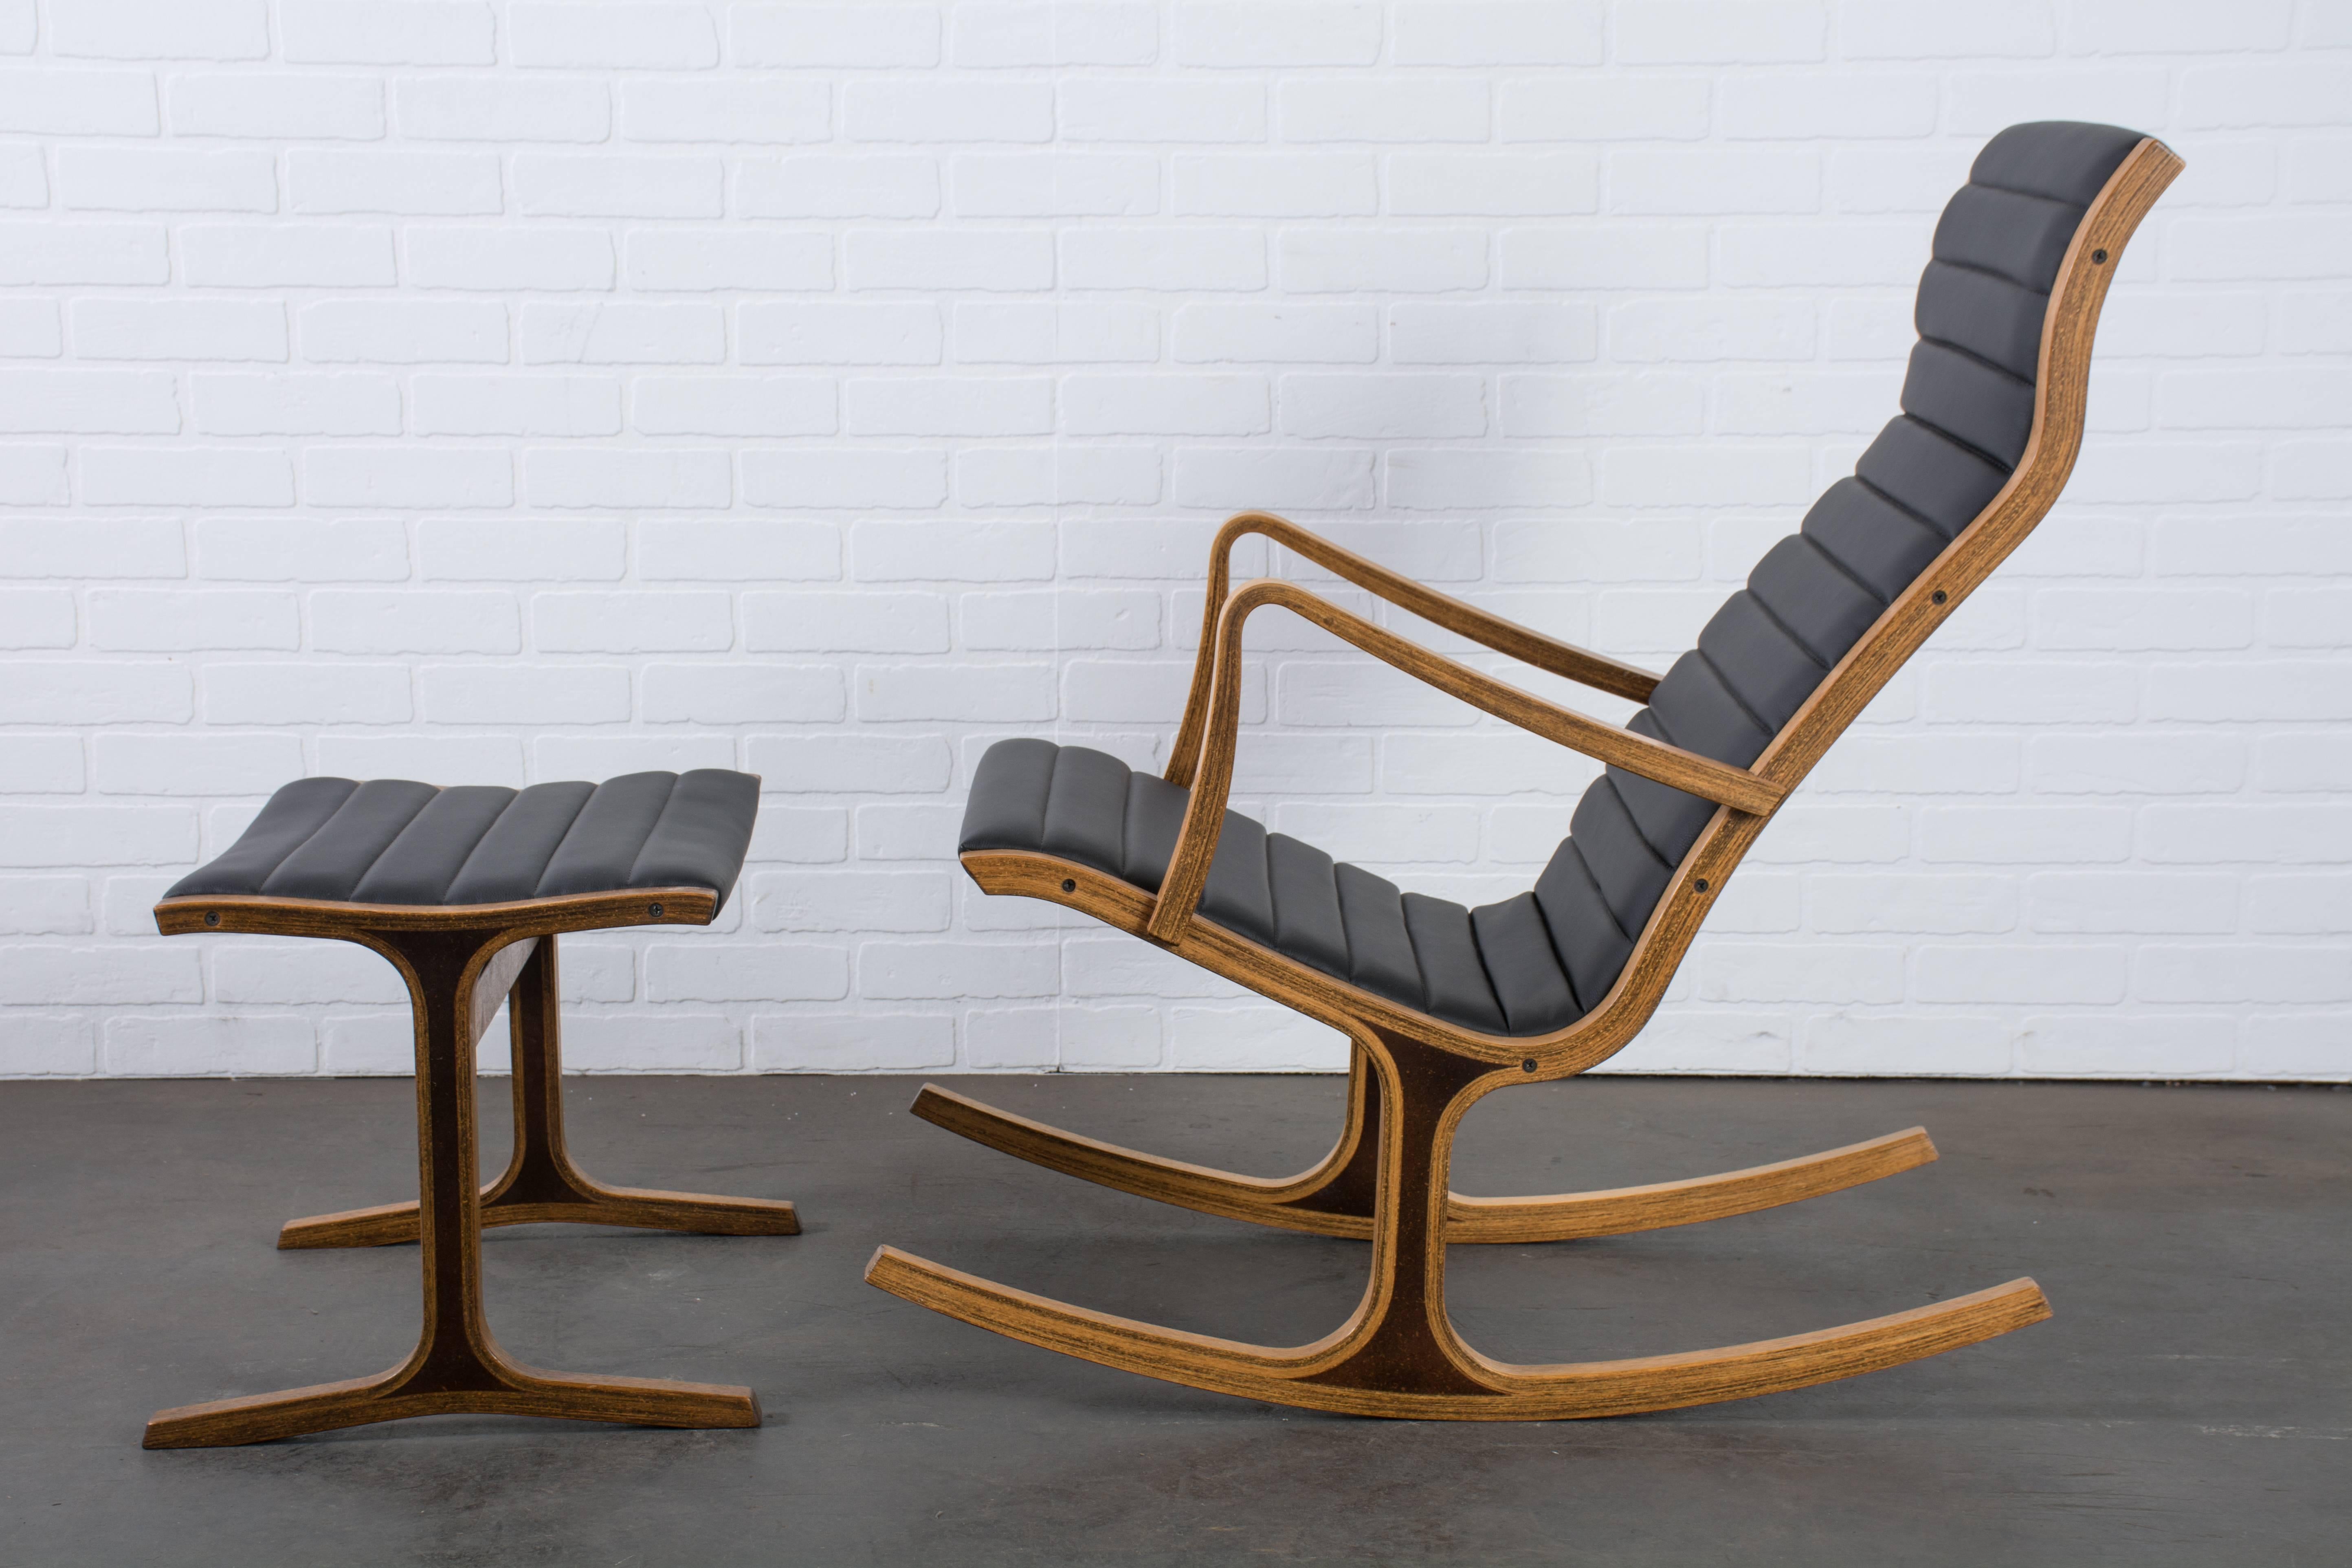 The award-winning Heron rocker was designed by Mitsumasa Sugasawa for Tendo Mokko, Japan in the 1960's. This vintage high back rocking chair comes with a footrest and features a bentwood frame in Japanese oak and professionally reupholstered black